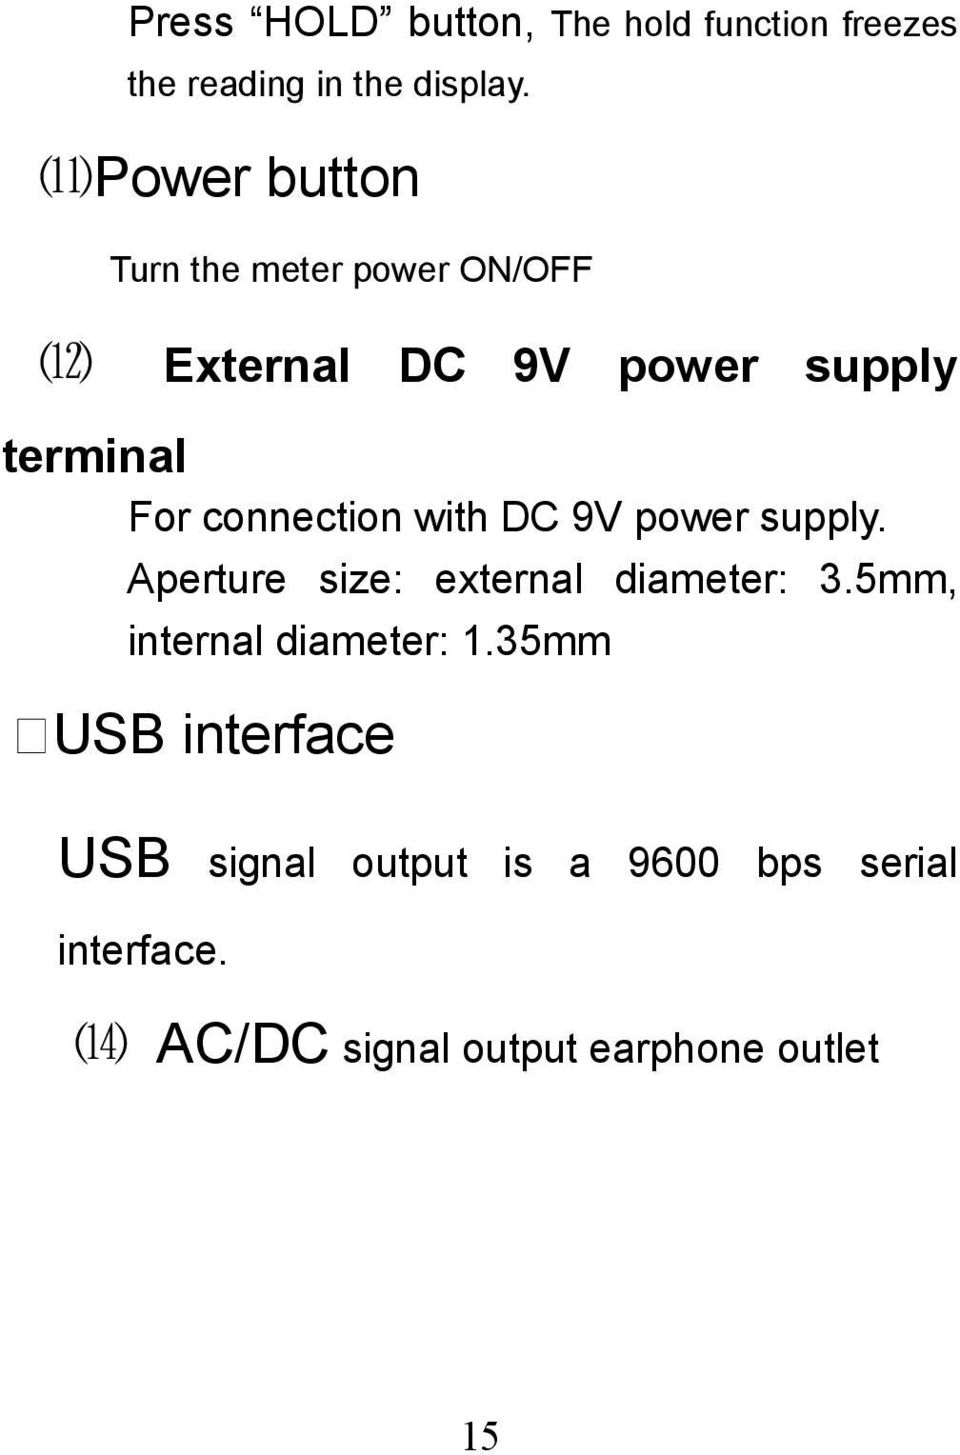 connection with DC 9V power supply. Aperture size: external diameter: 3.